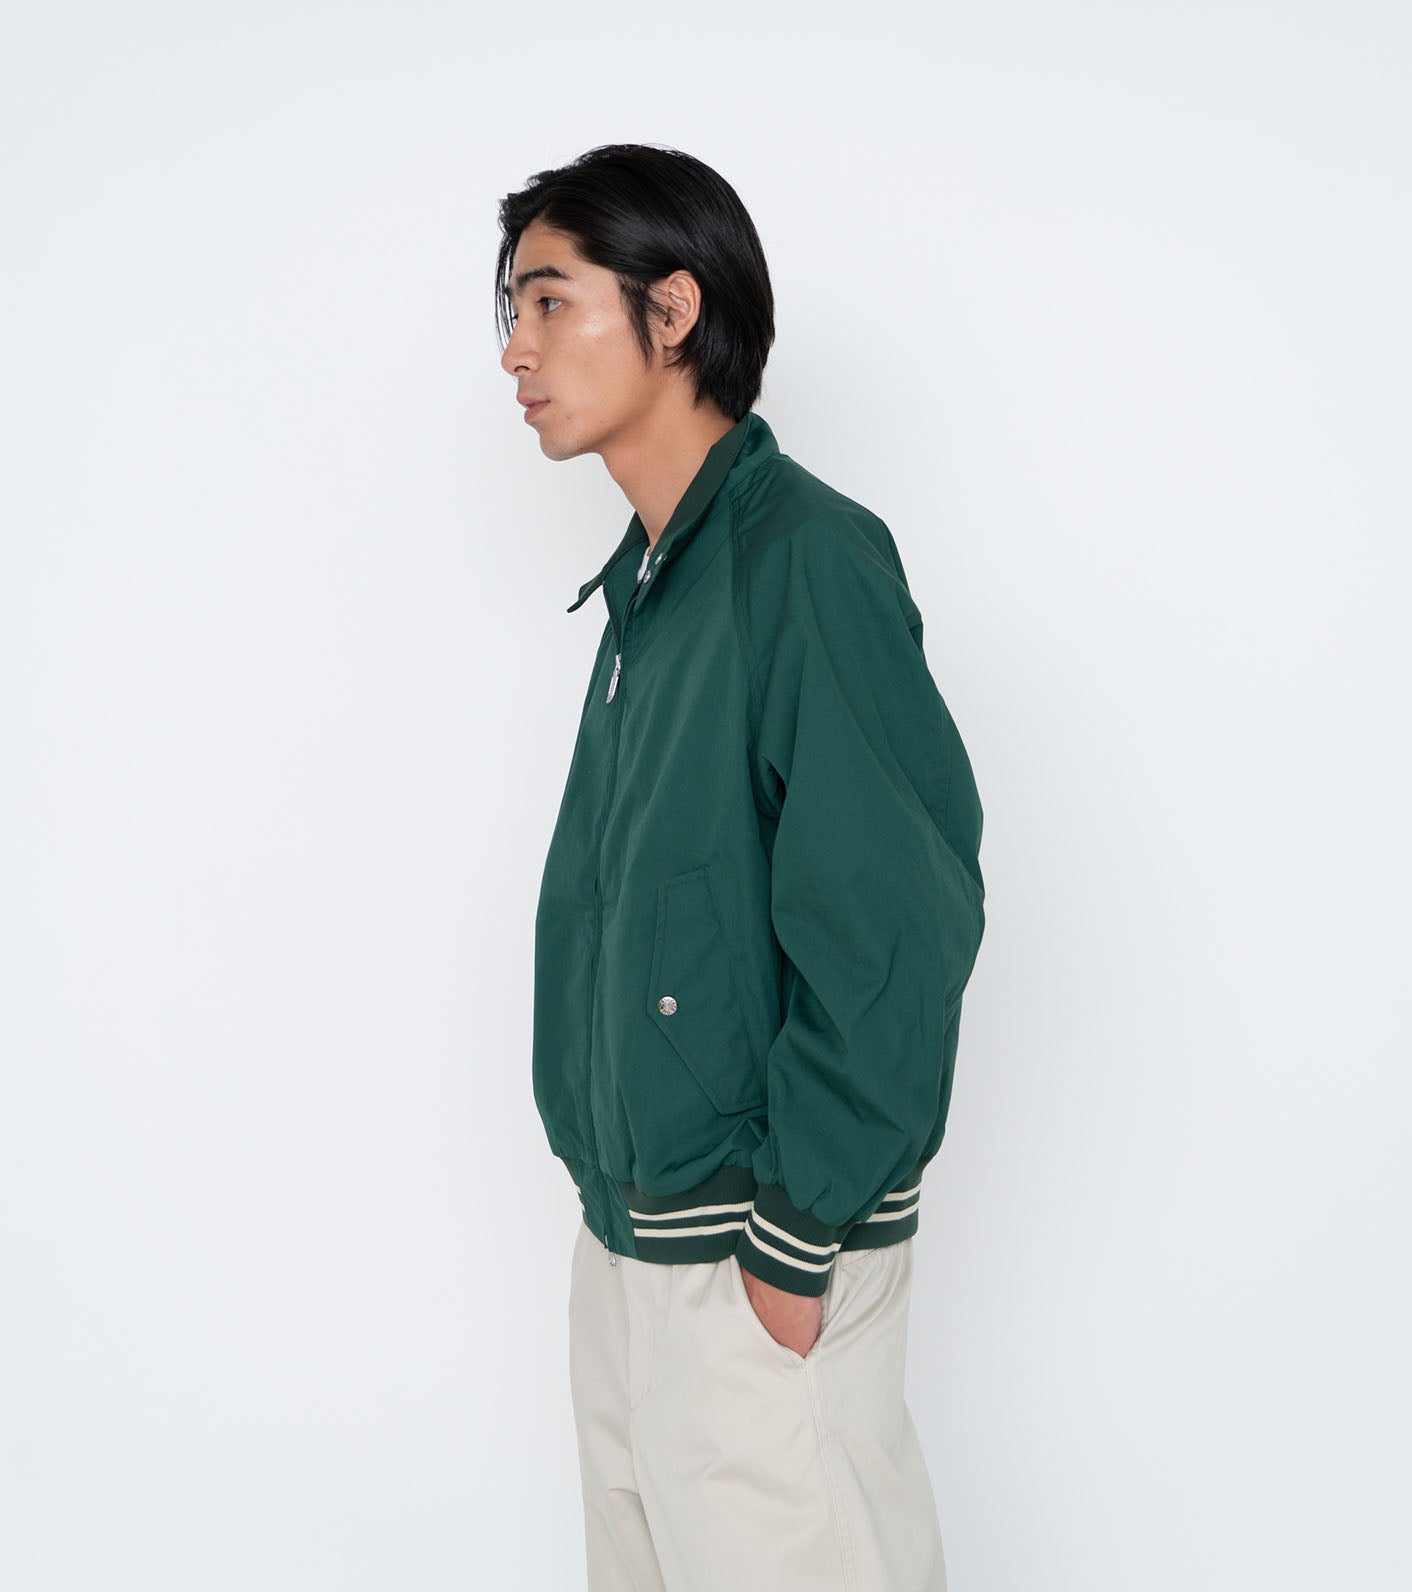 THE NORTH FACE PURPLE LABEL 65/35 Field Jacket